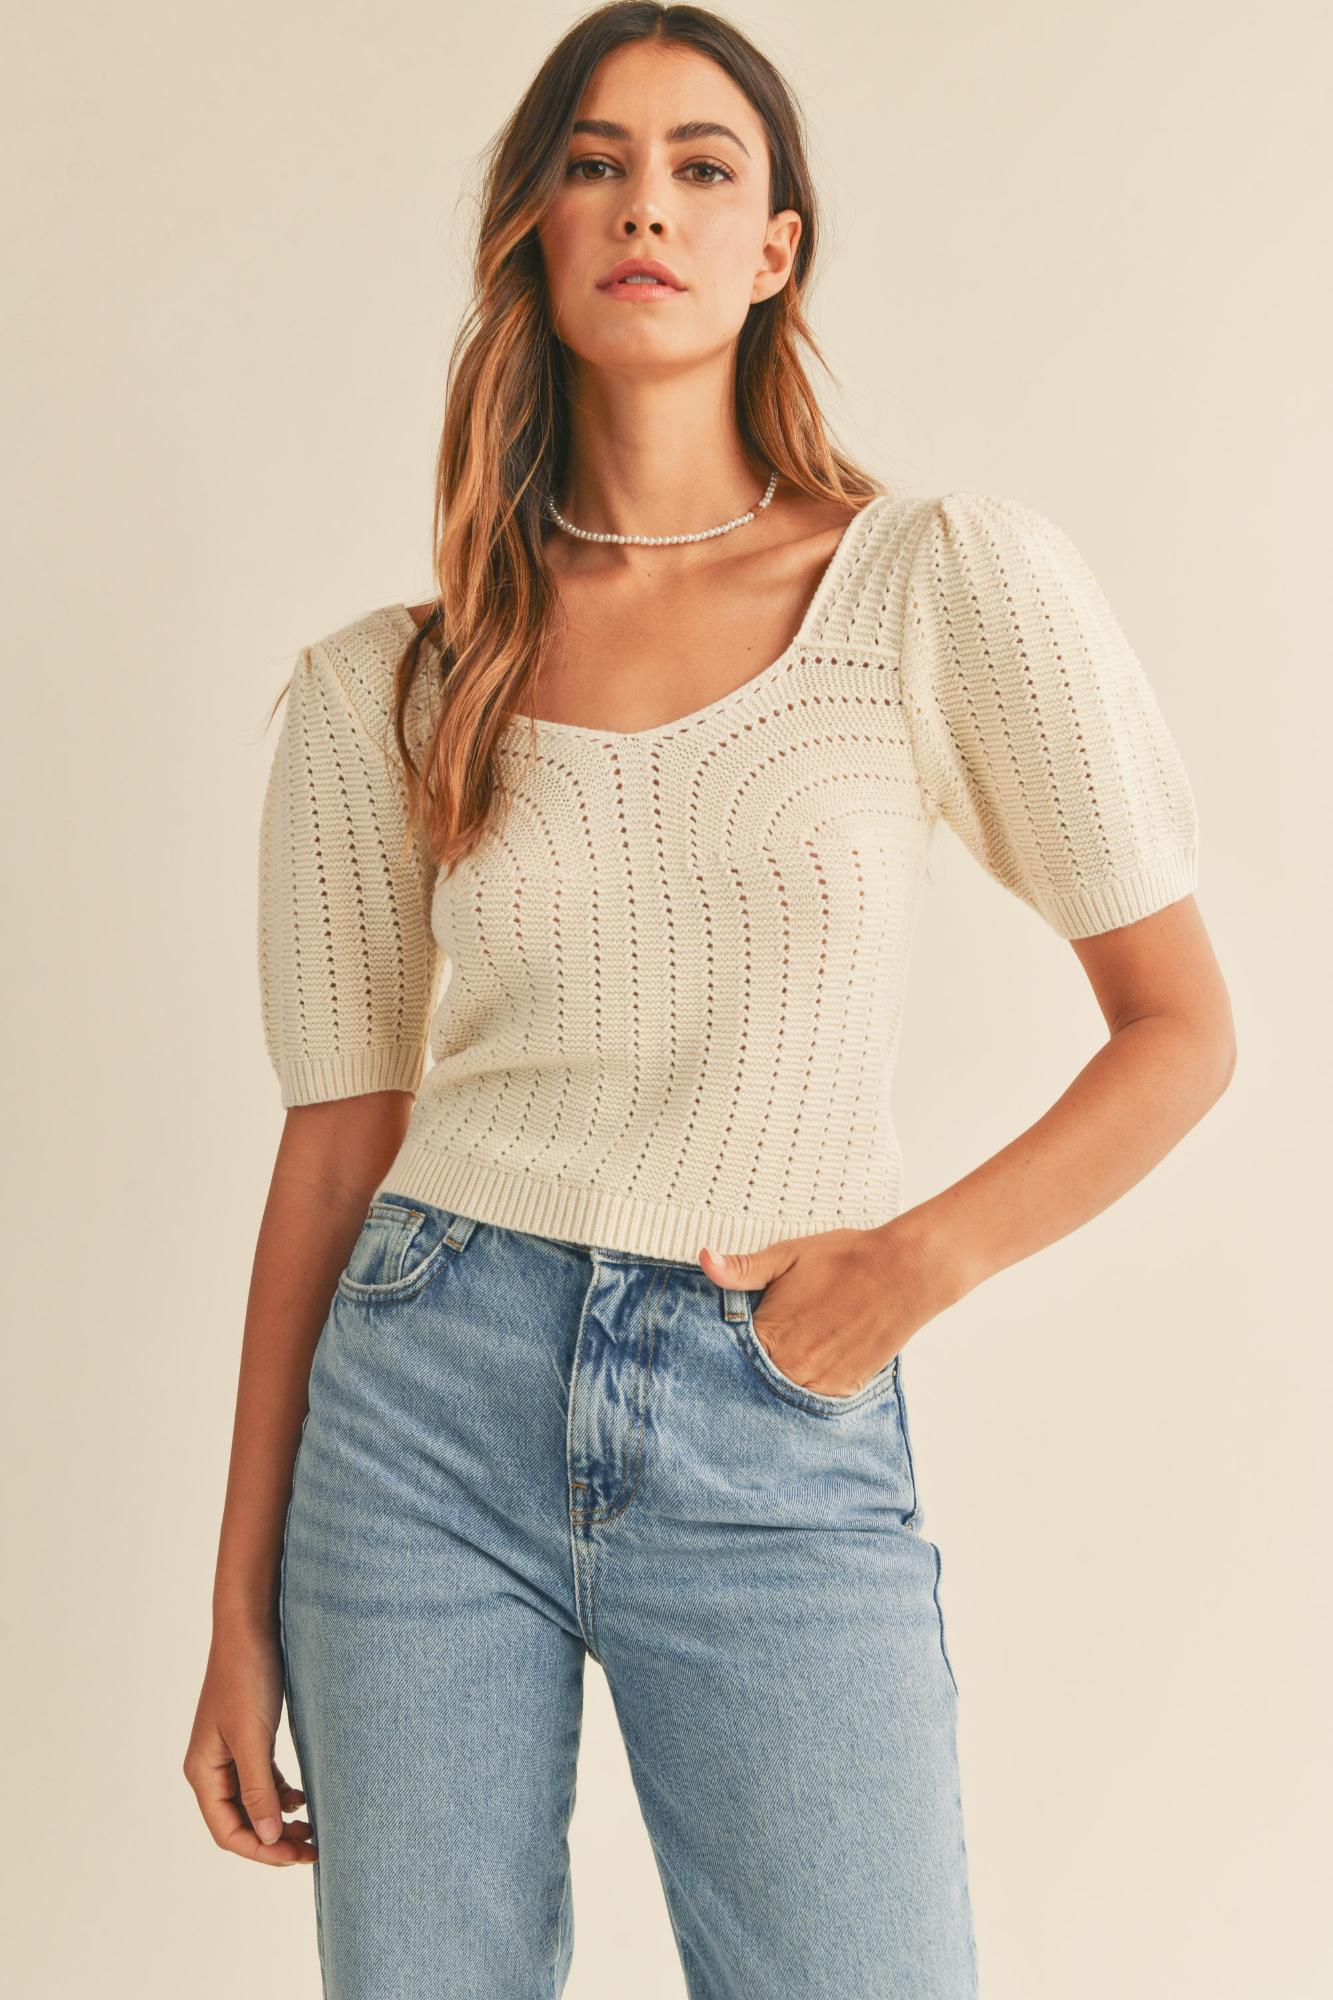 Reese's Favorite Puff Sleeve Knit Top